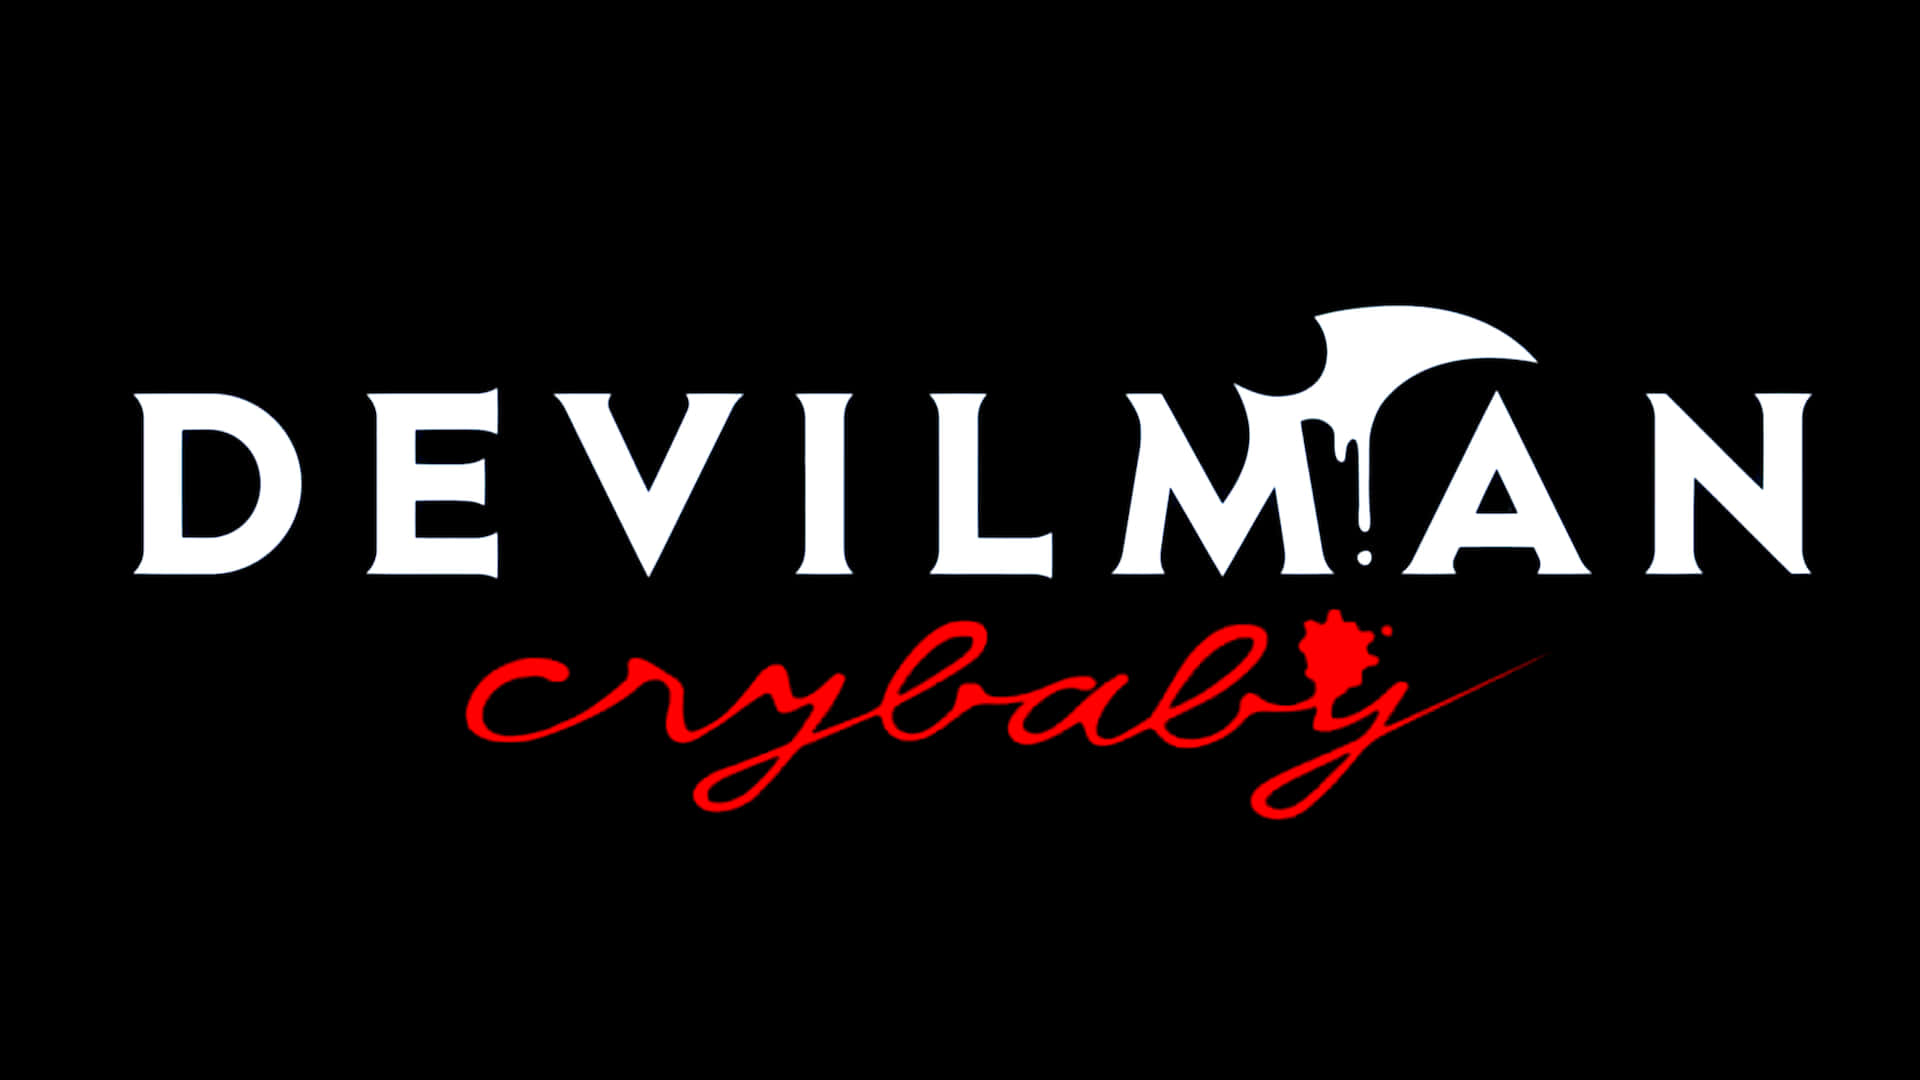 "Devilman Crybaby - Fearless and Unstoppable"